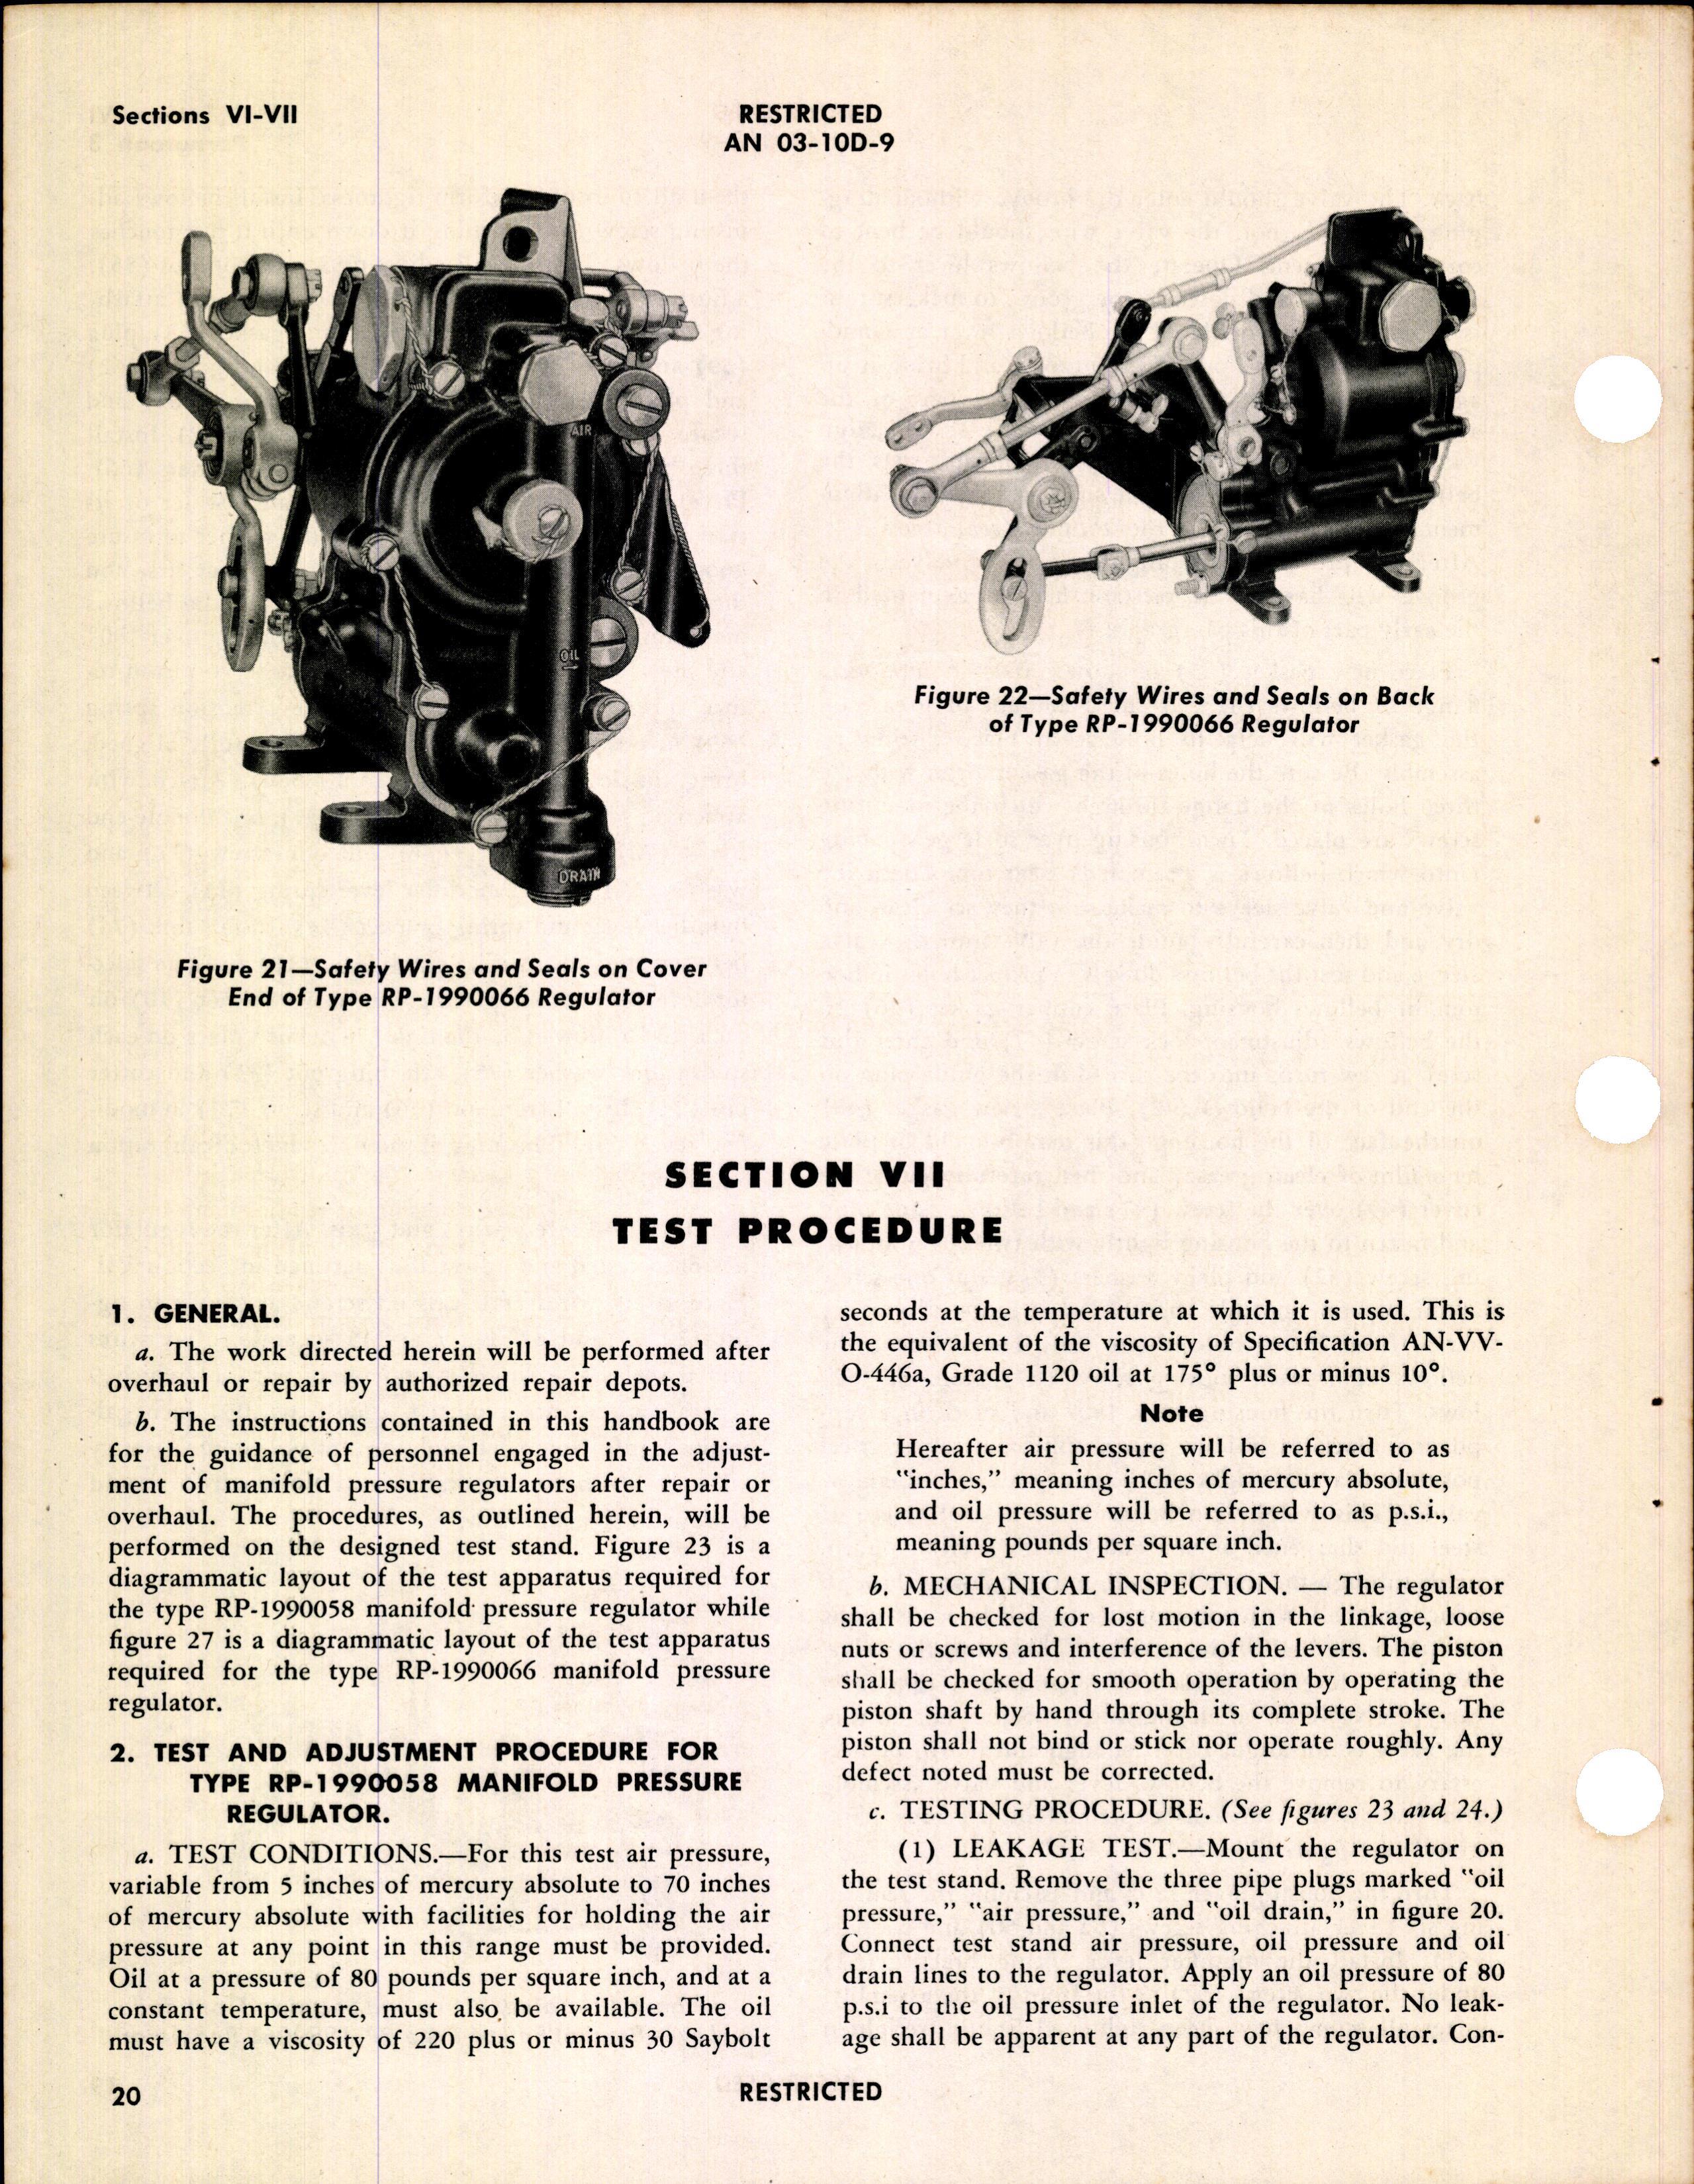 Sample page 26 from AirCorps Library document: Handbook of Instructions with Parts Catalog for Manifold Pressure Regulators